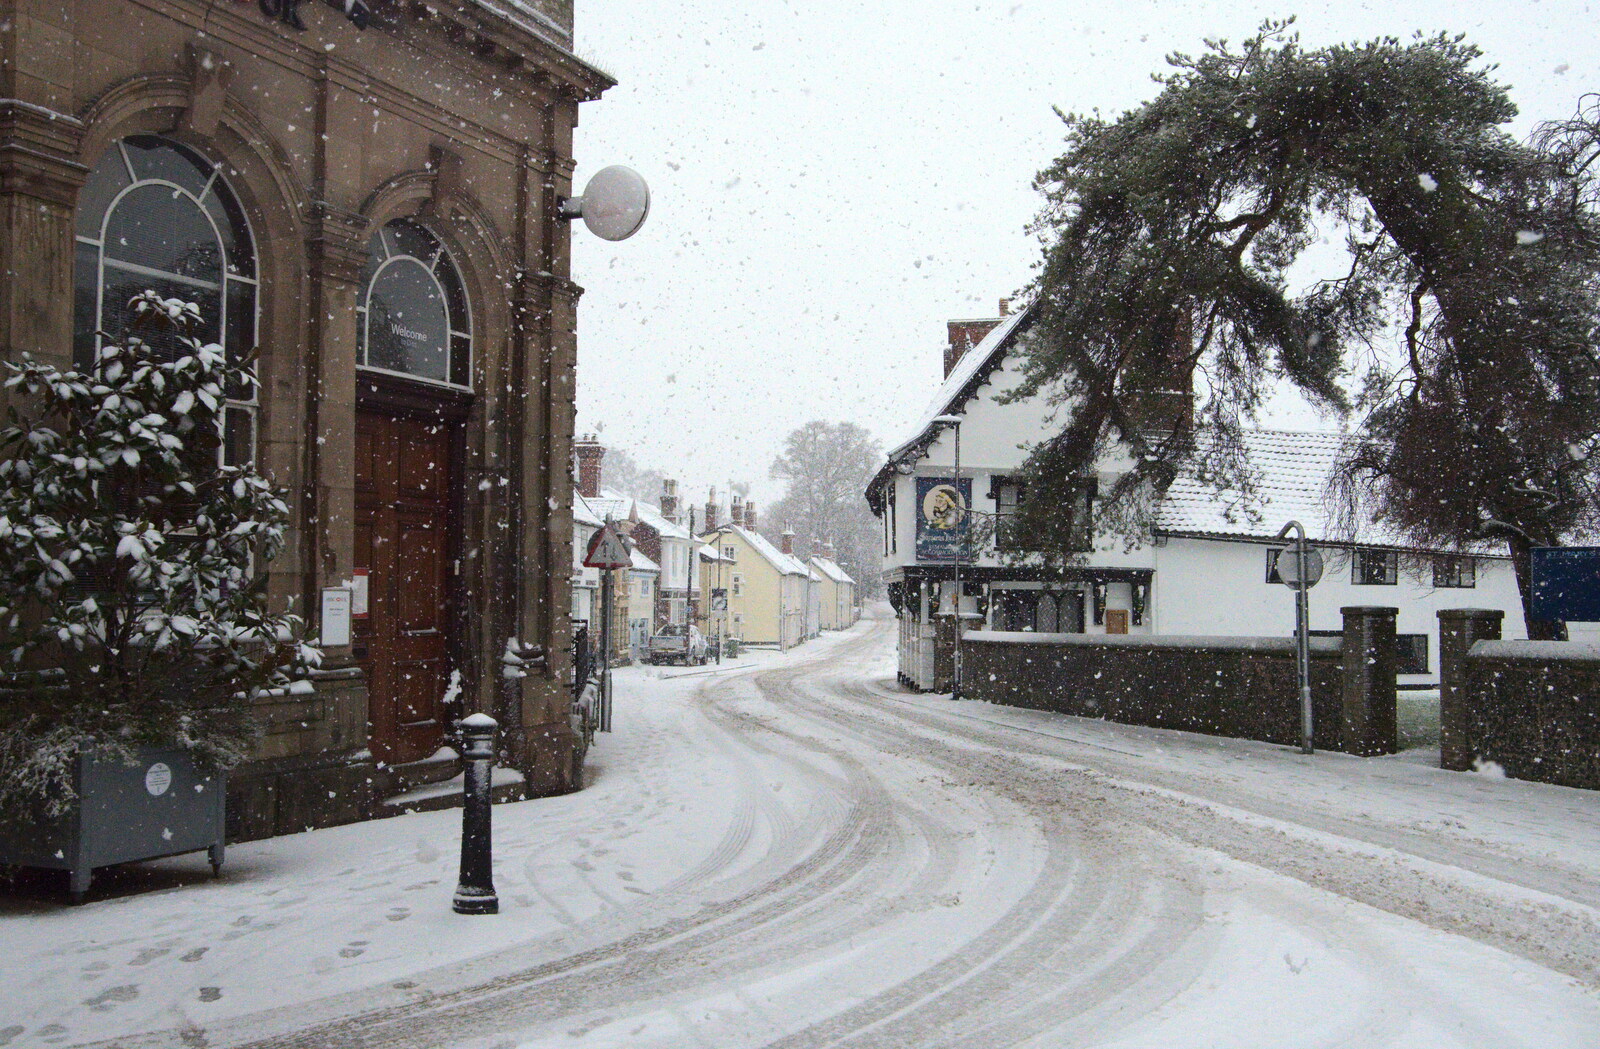 Mount Street and the Saracen's Head from A Snowy Morning, Diss, Norfolk - 16th January 2021